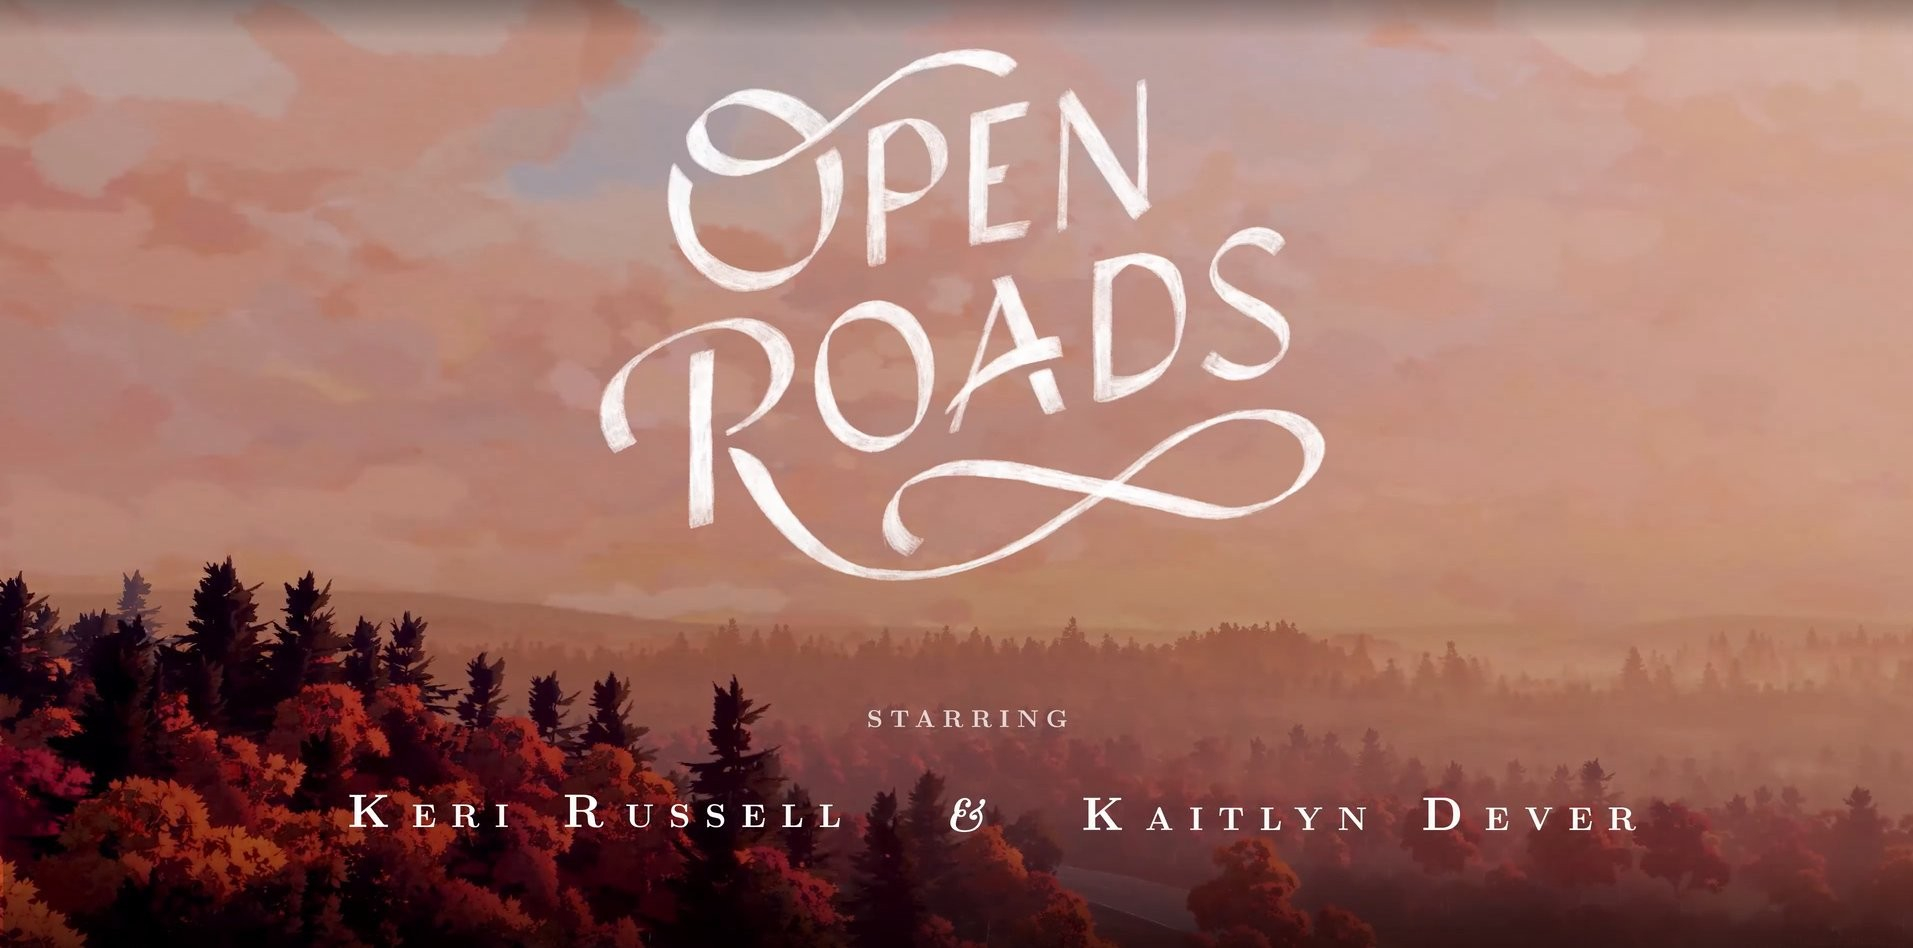 Open Roads игра. Open Roads игра обзор. Open Roads Fullbright. Open Roads game русский. Open my game